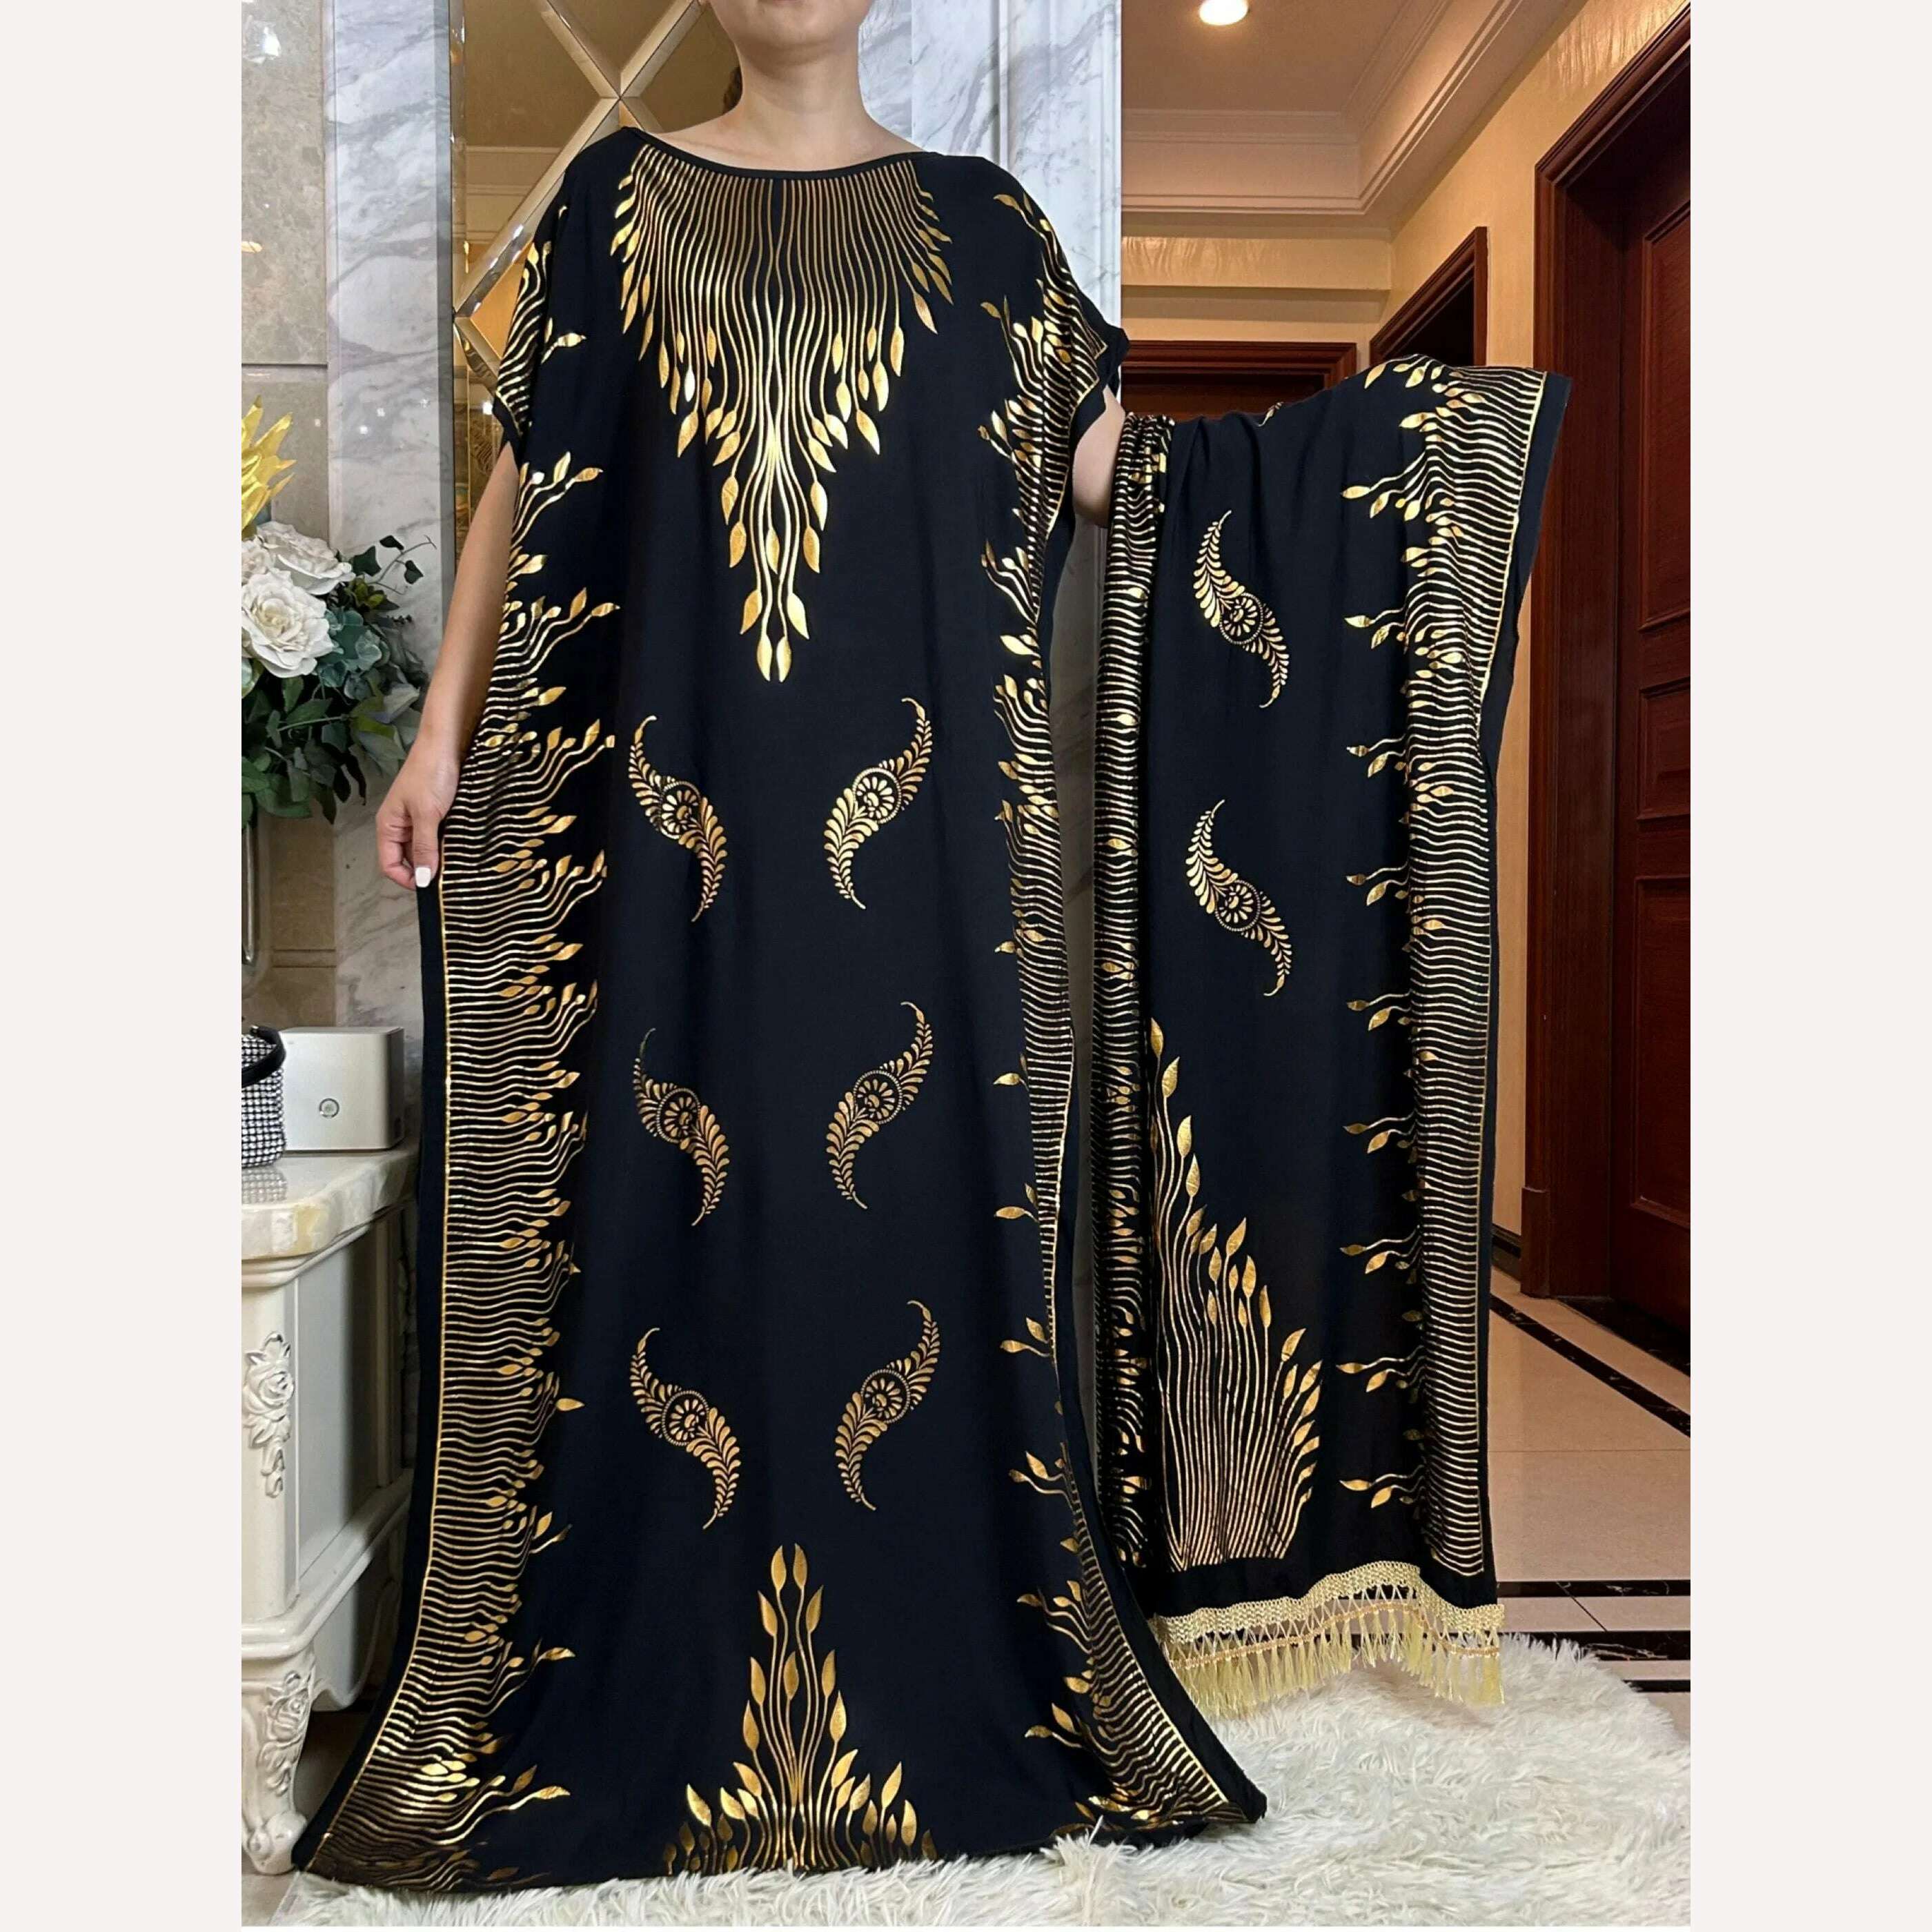 KIMLUD, Dubai New Abaya For Women  Summer Short Sleeve Cotton Dress Gold Stamping Loose Lady Maxi Islam African Dress With Big Scarf, HB438-10 / One Size, KIMLUD Women's Clothes